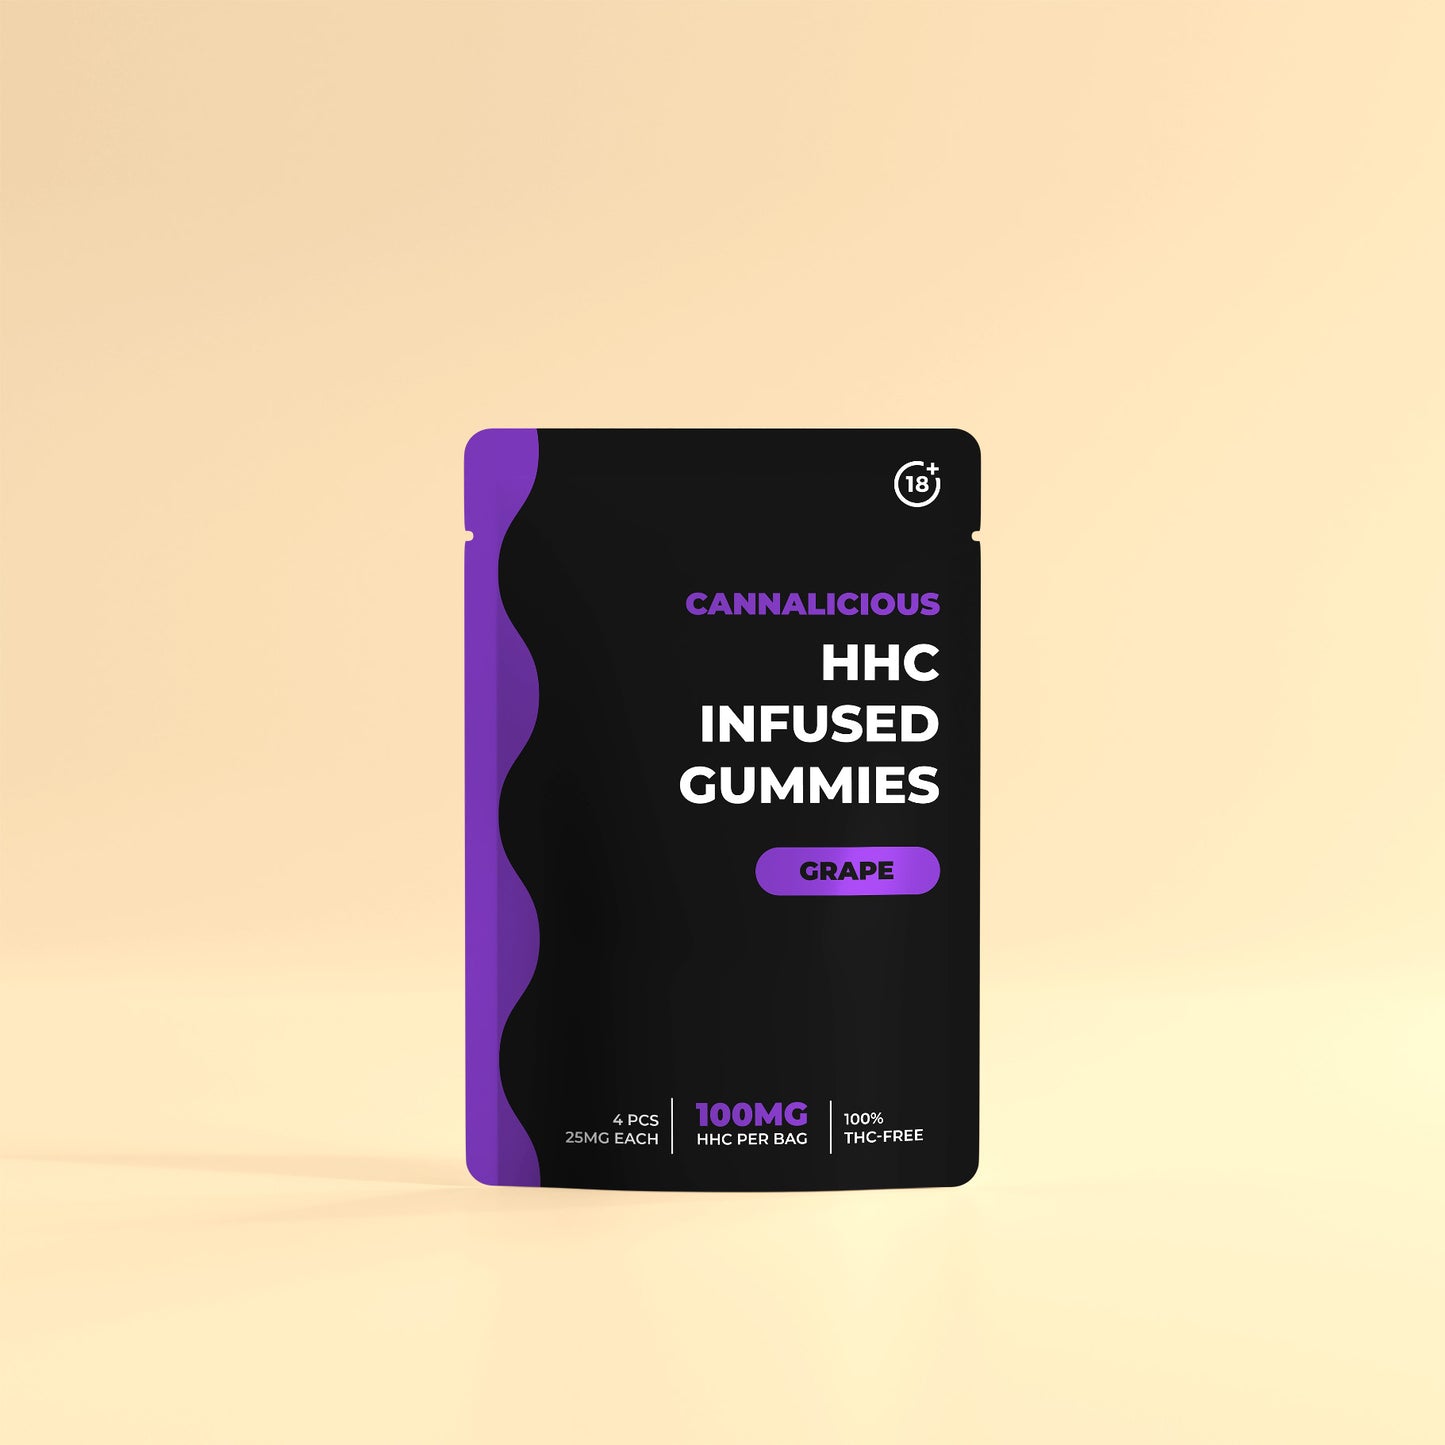 HHC Infused Gummies